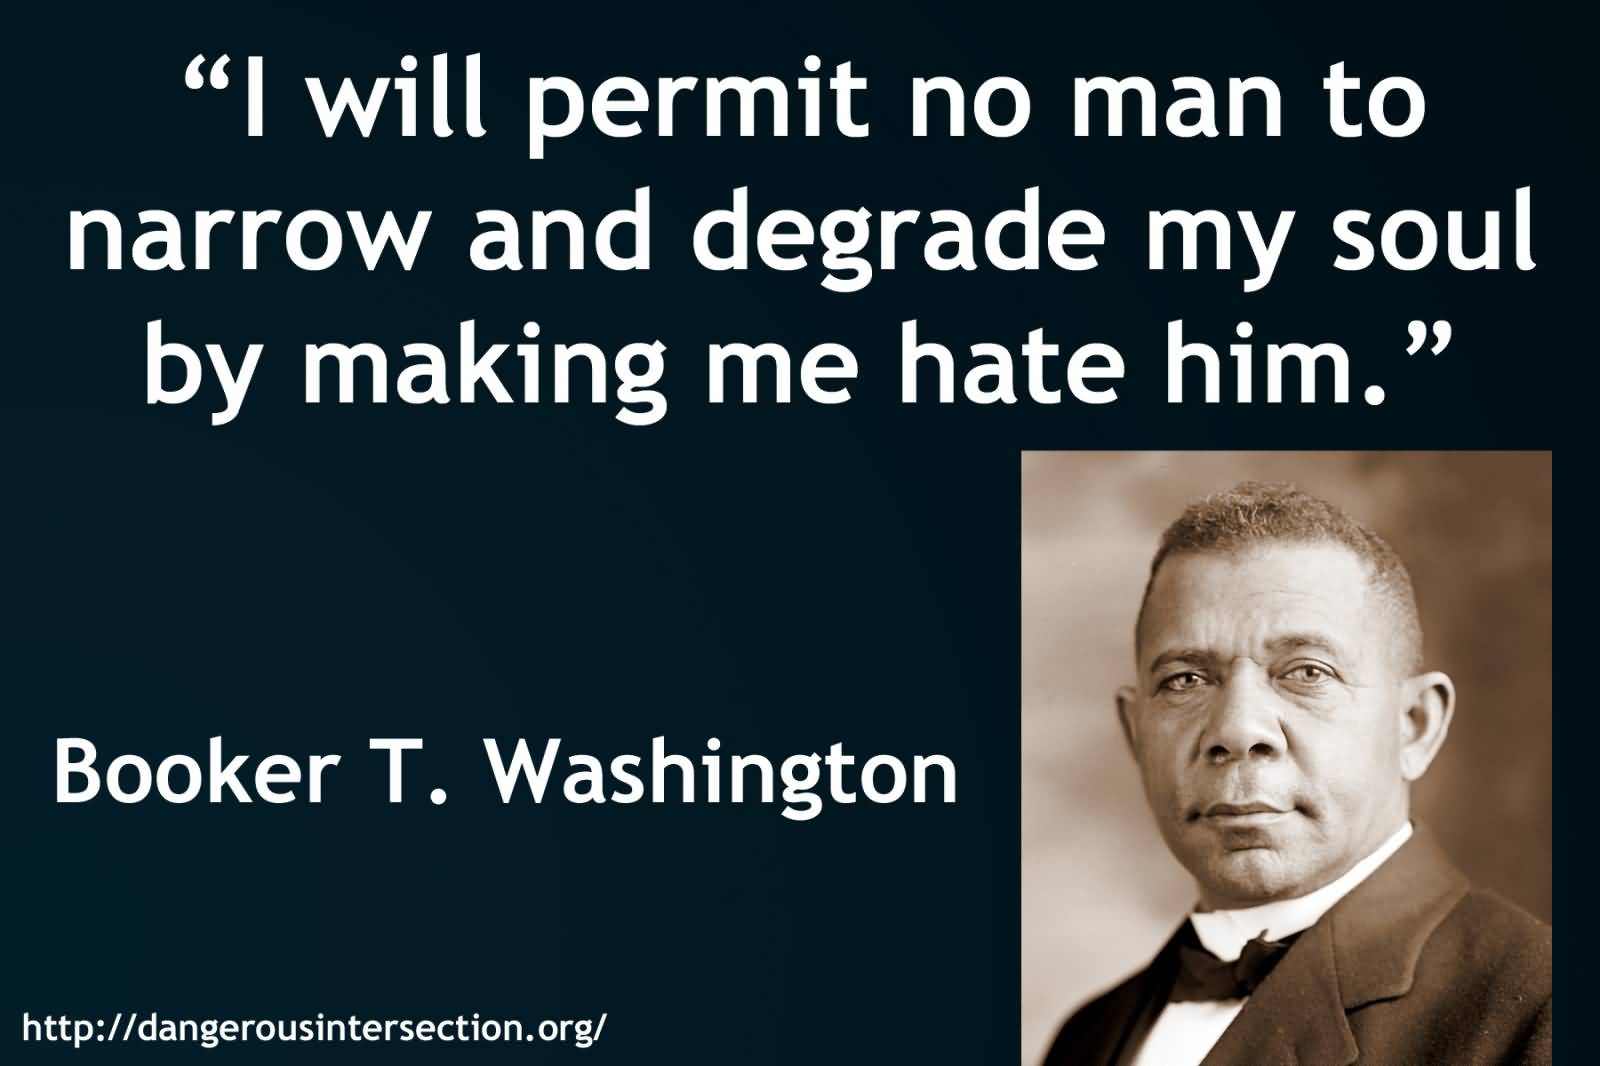 I will permit no man to narrow and degrade my soul by making me hate him.